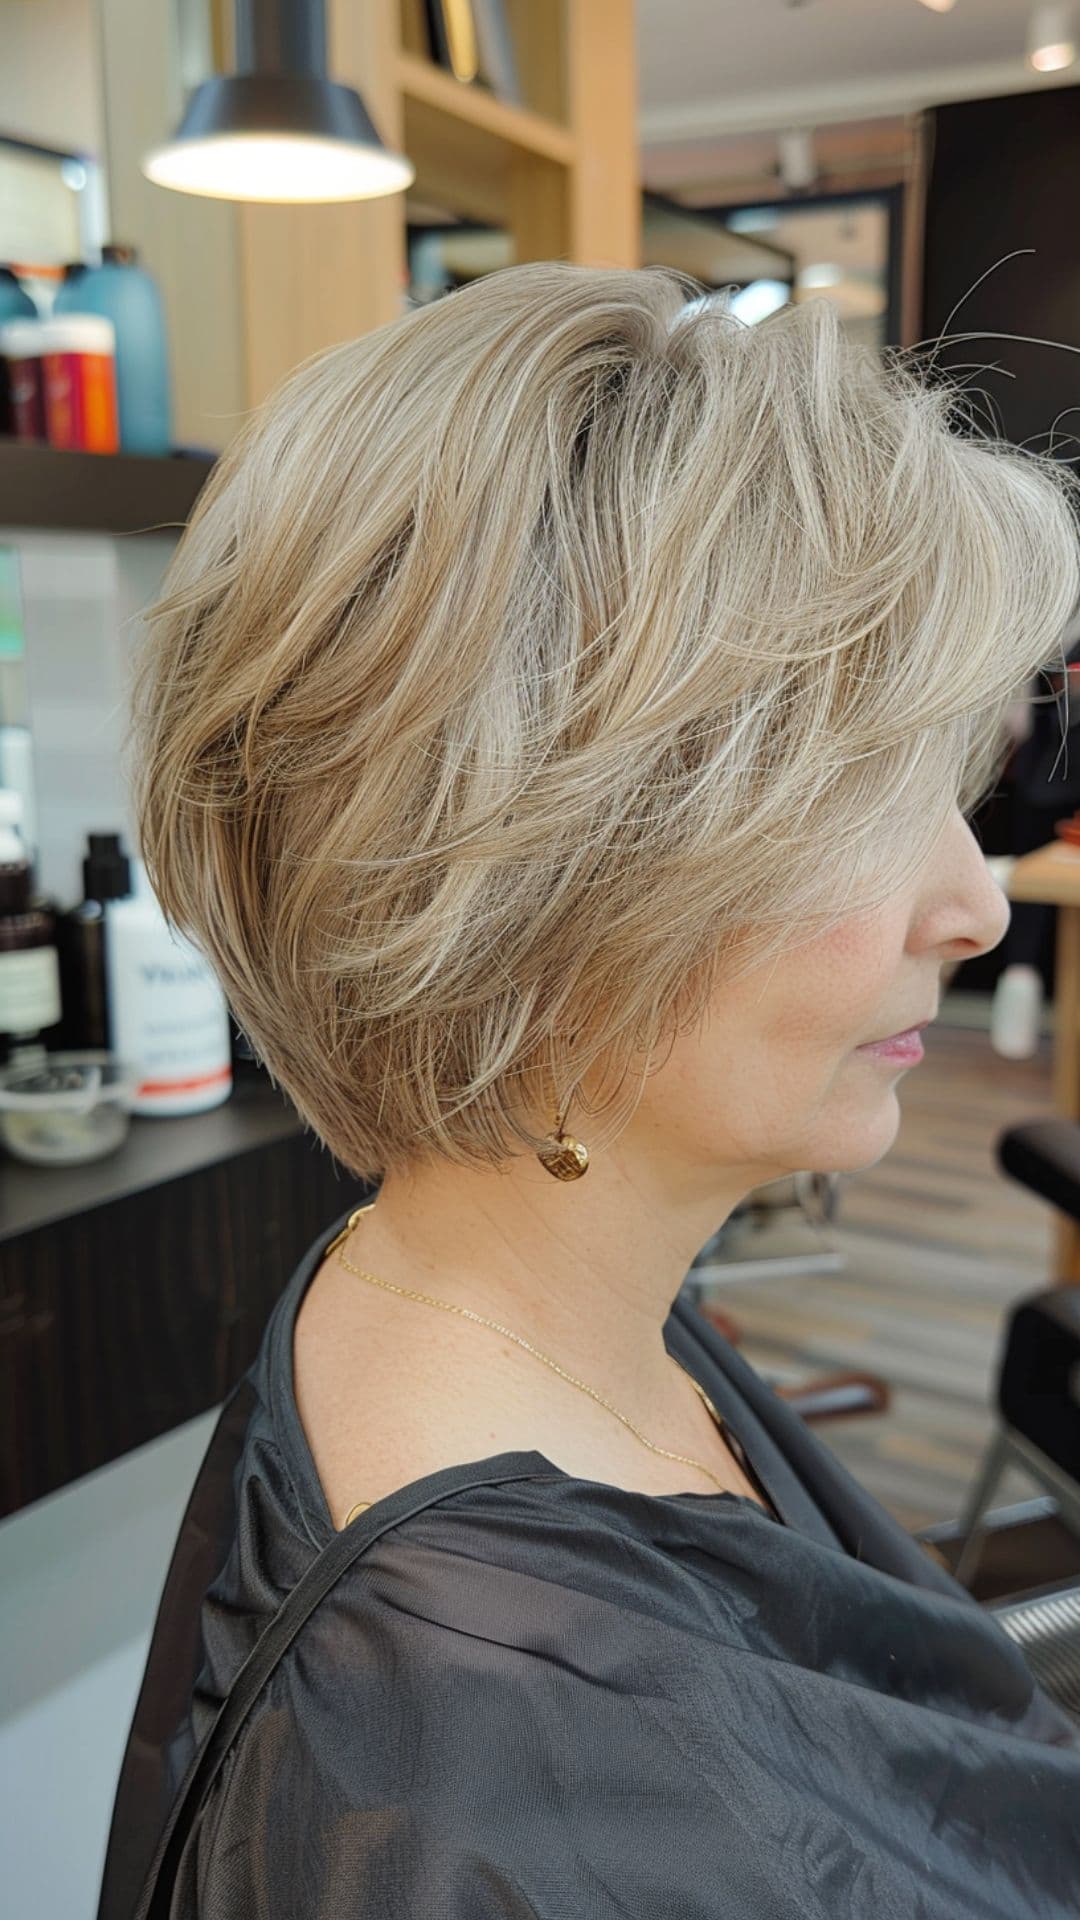 An old woman modelling a pixie bob with multitone blonde.